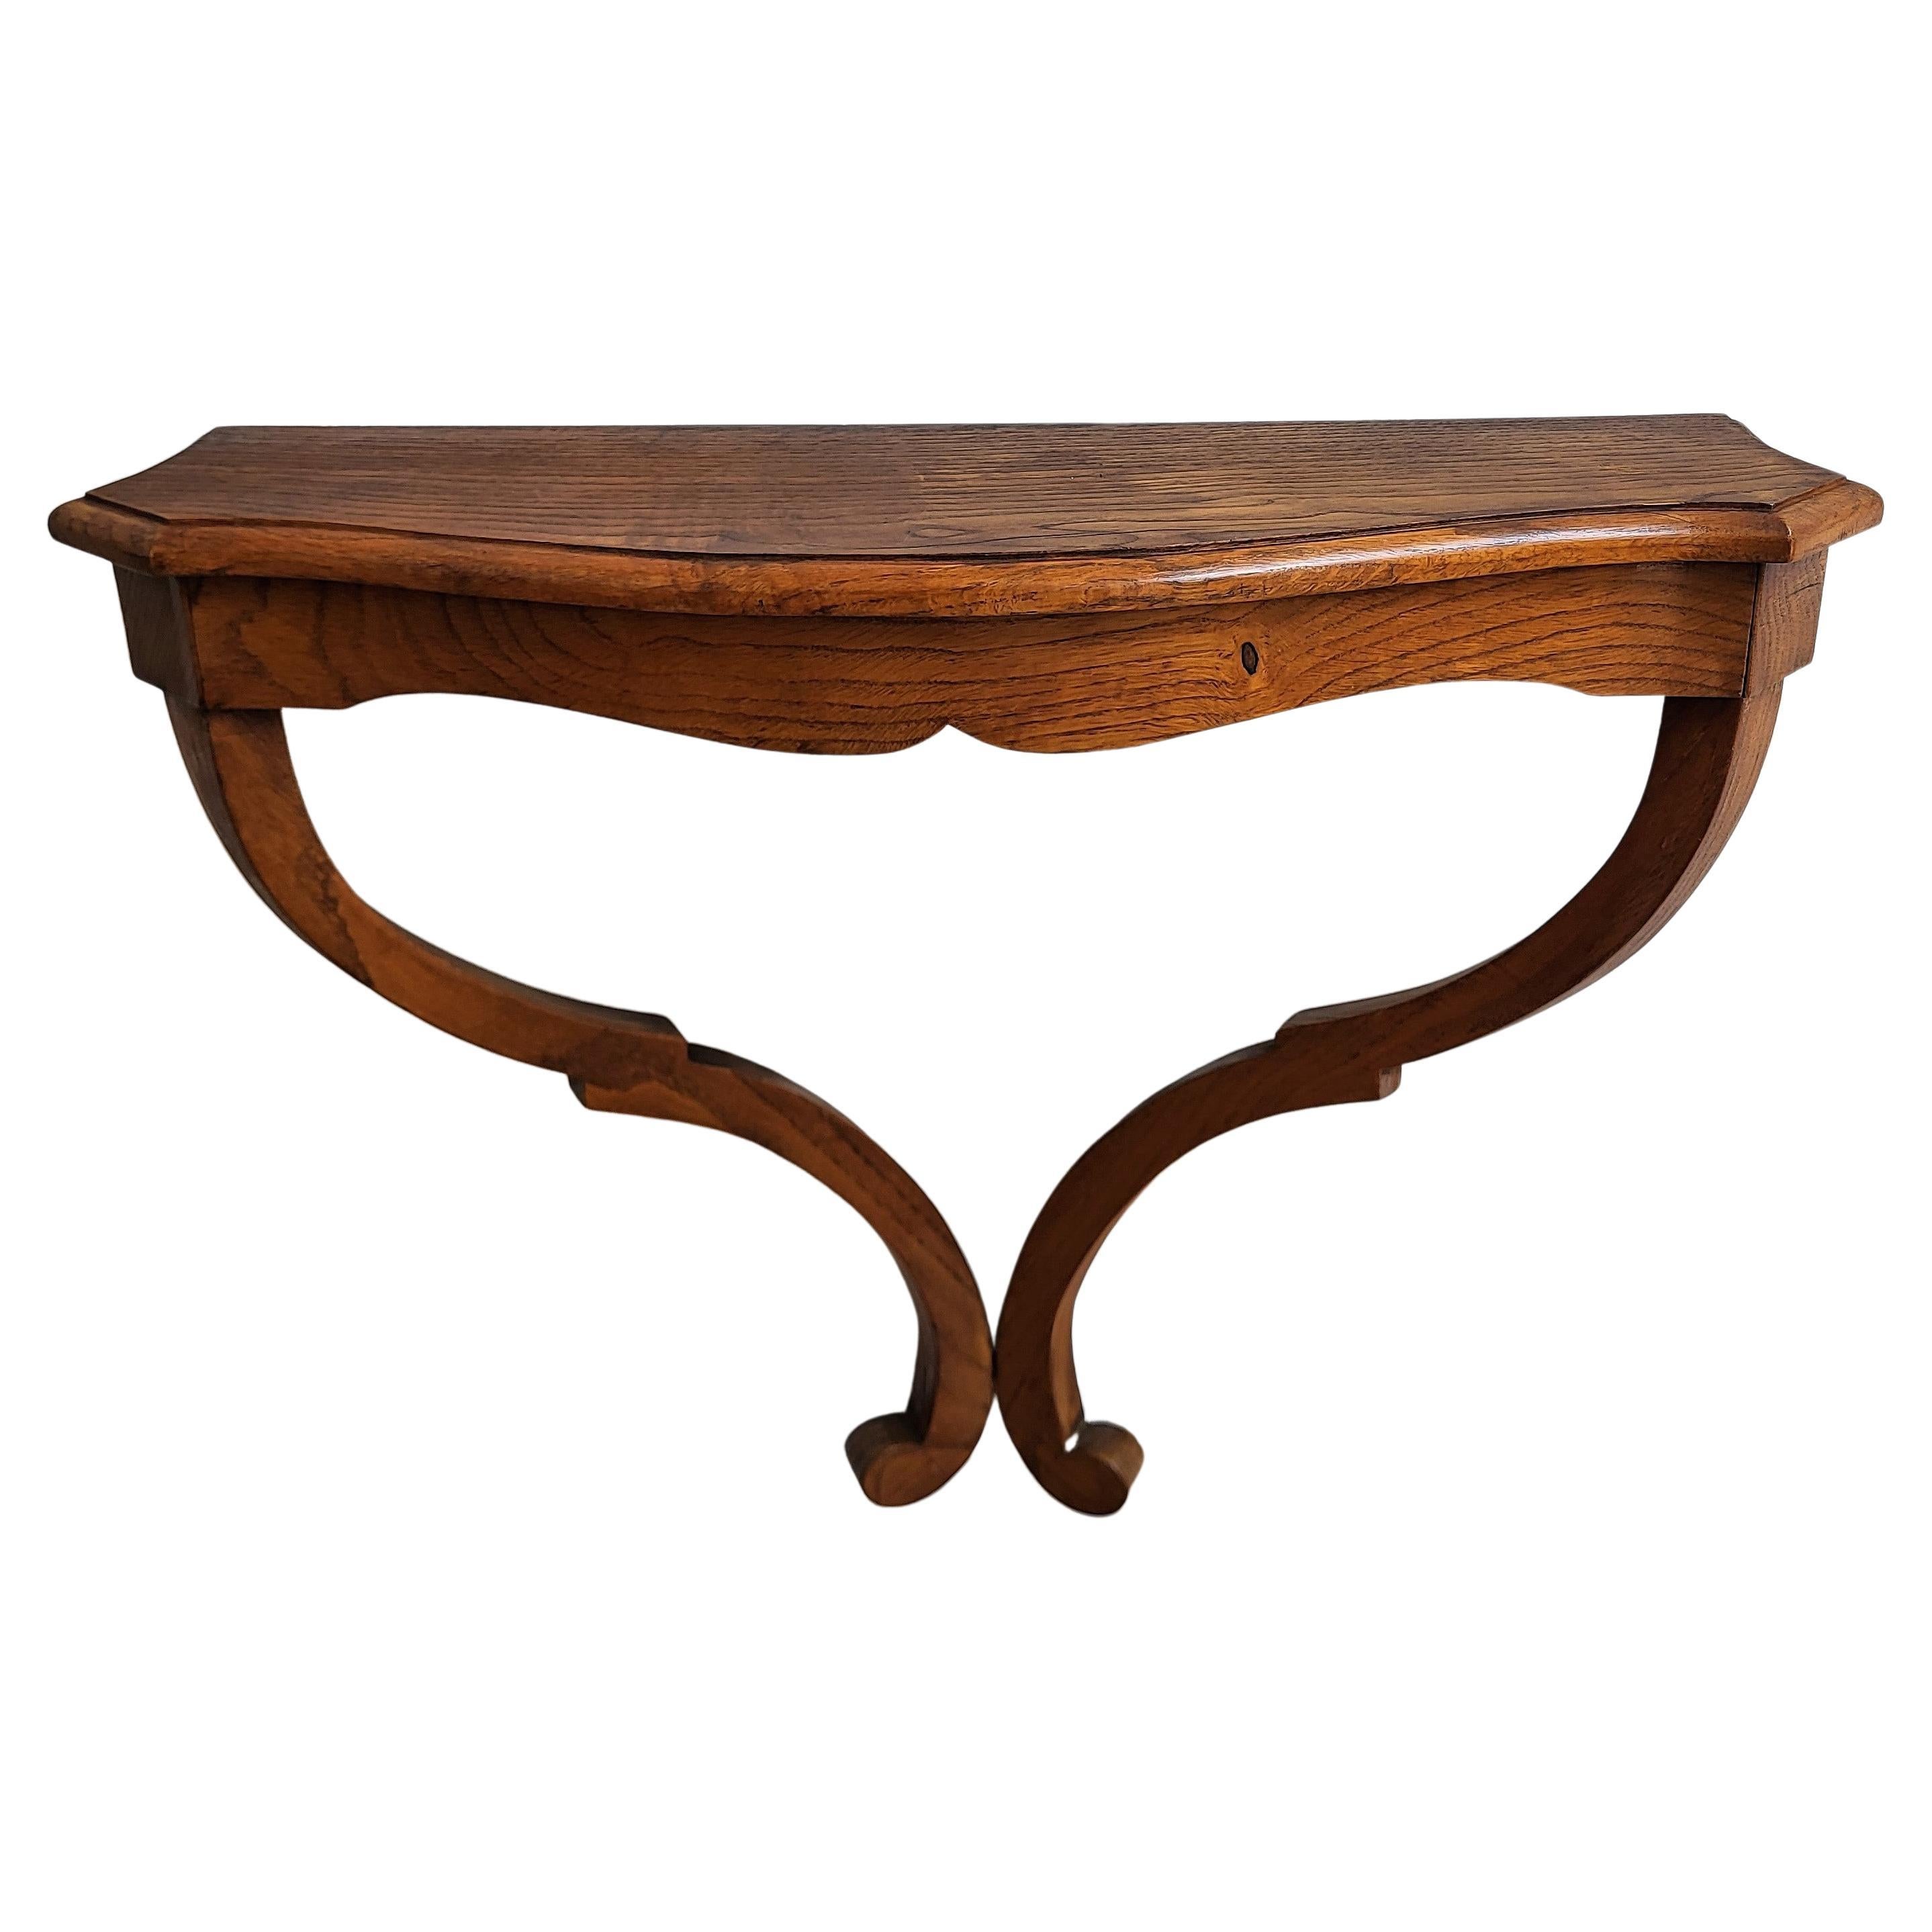 1960s Italian Wooden Carved Wall Mounted Console Table Shelf